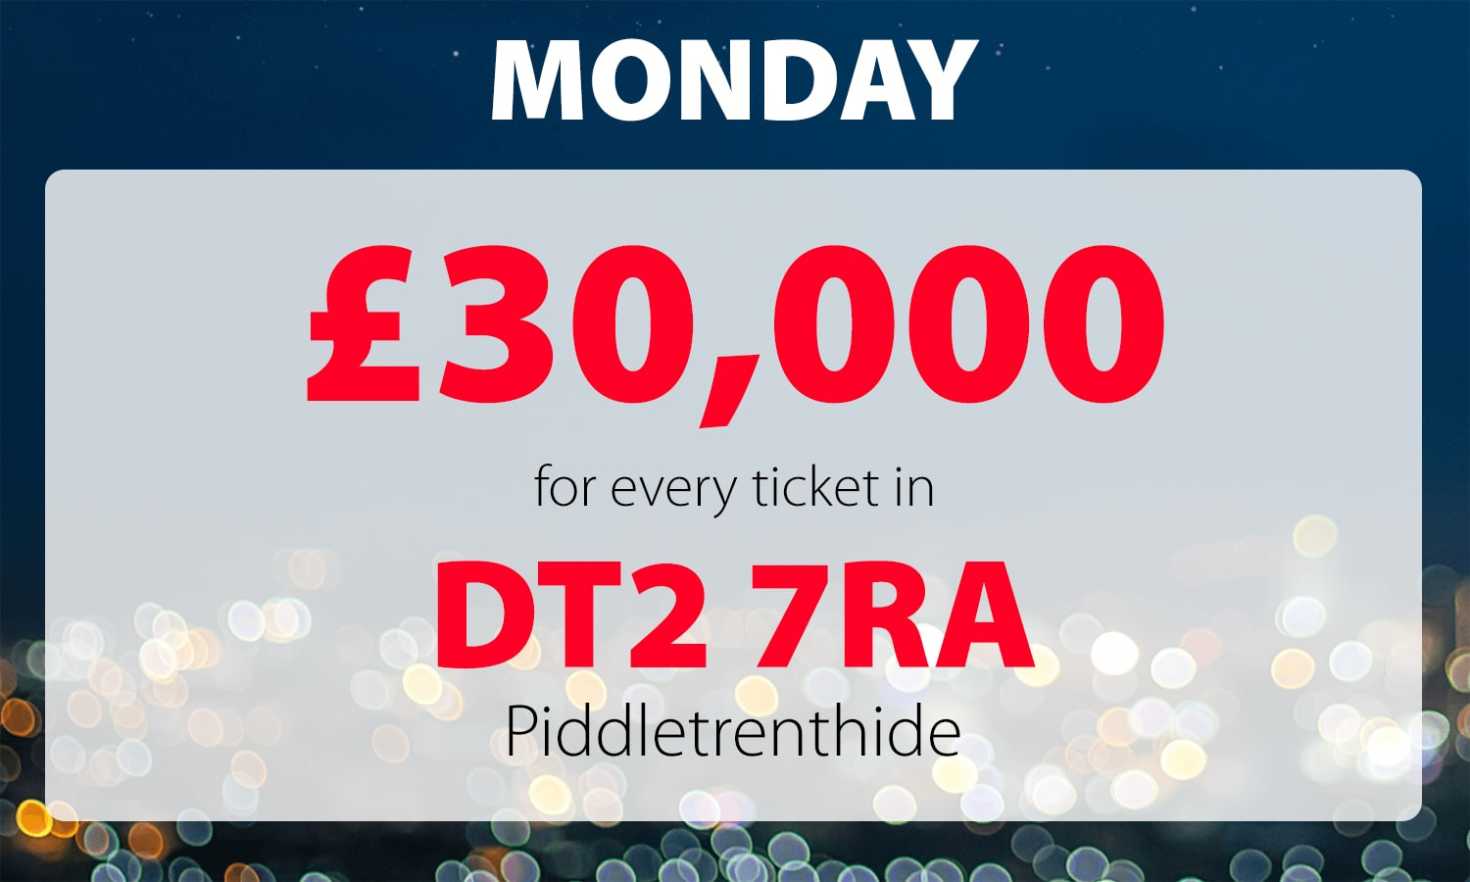 A lucky Piddletrenthide player has won a whopping £30,000 prize